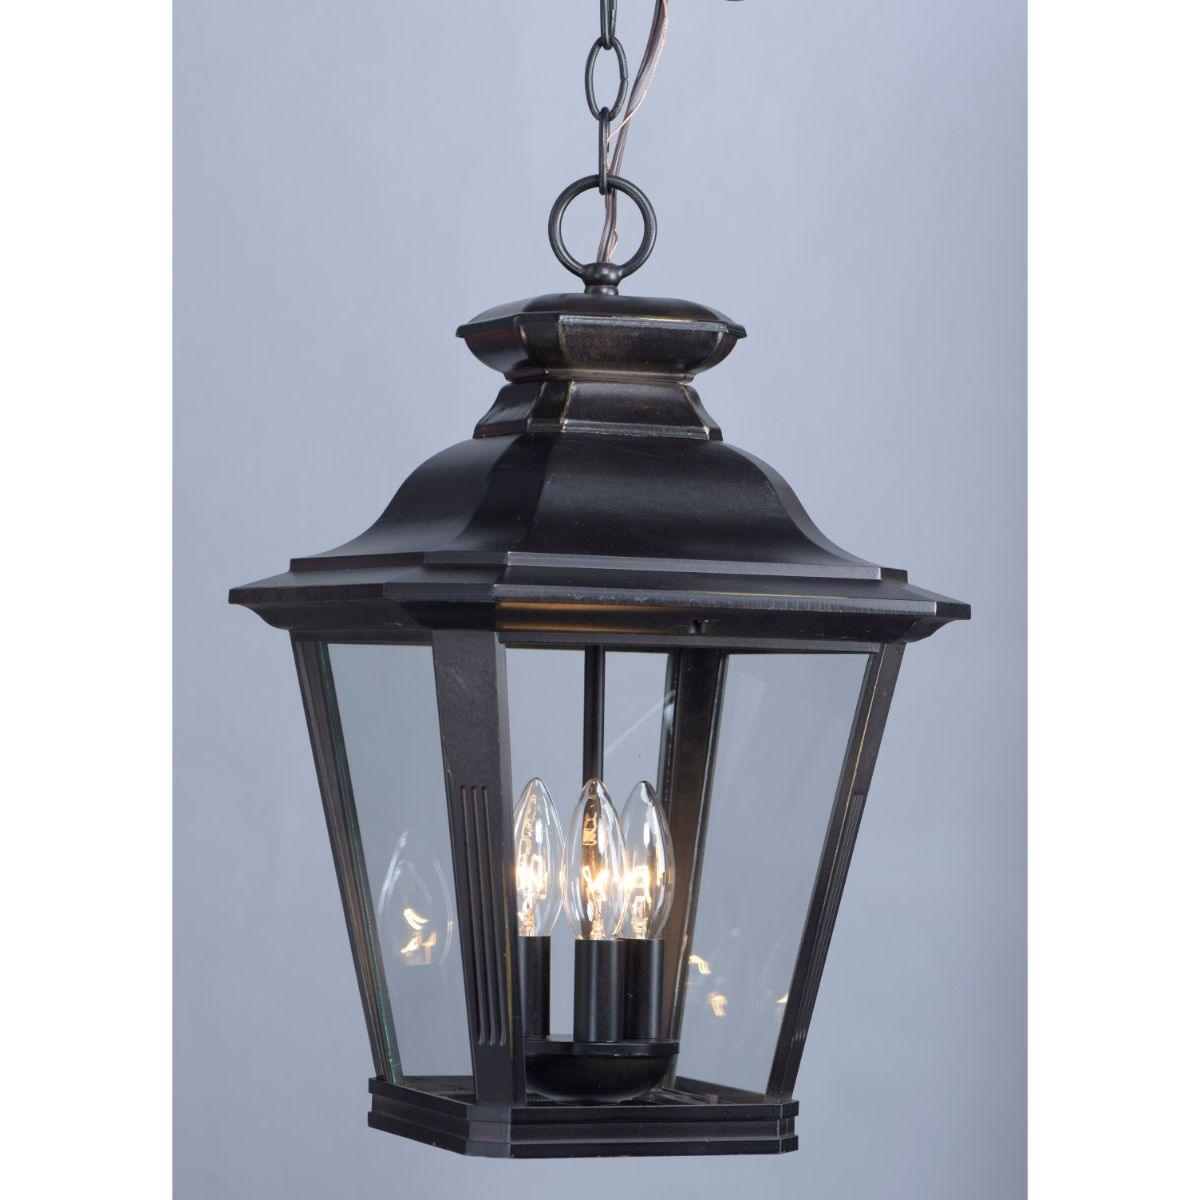 Knoxville 18 in. Outdoor Hanging Lantern Bronze finish